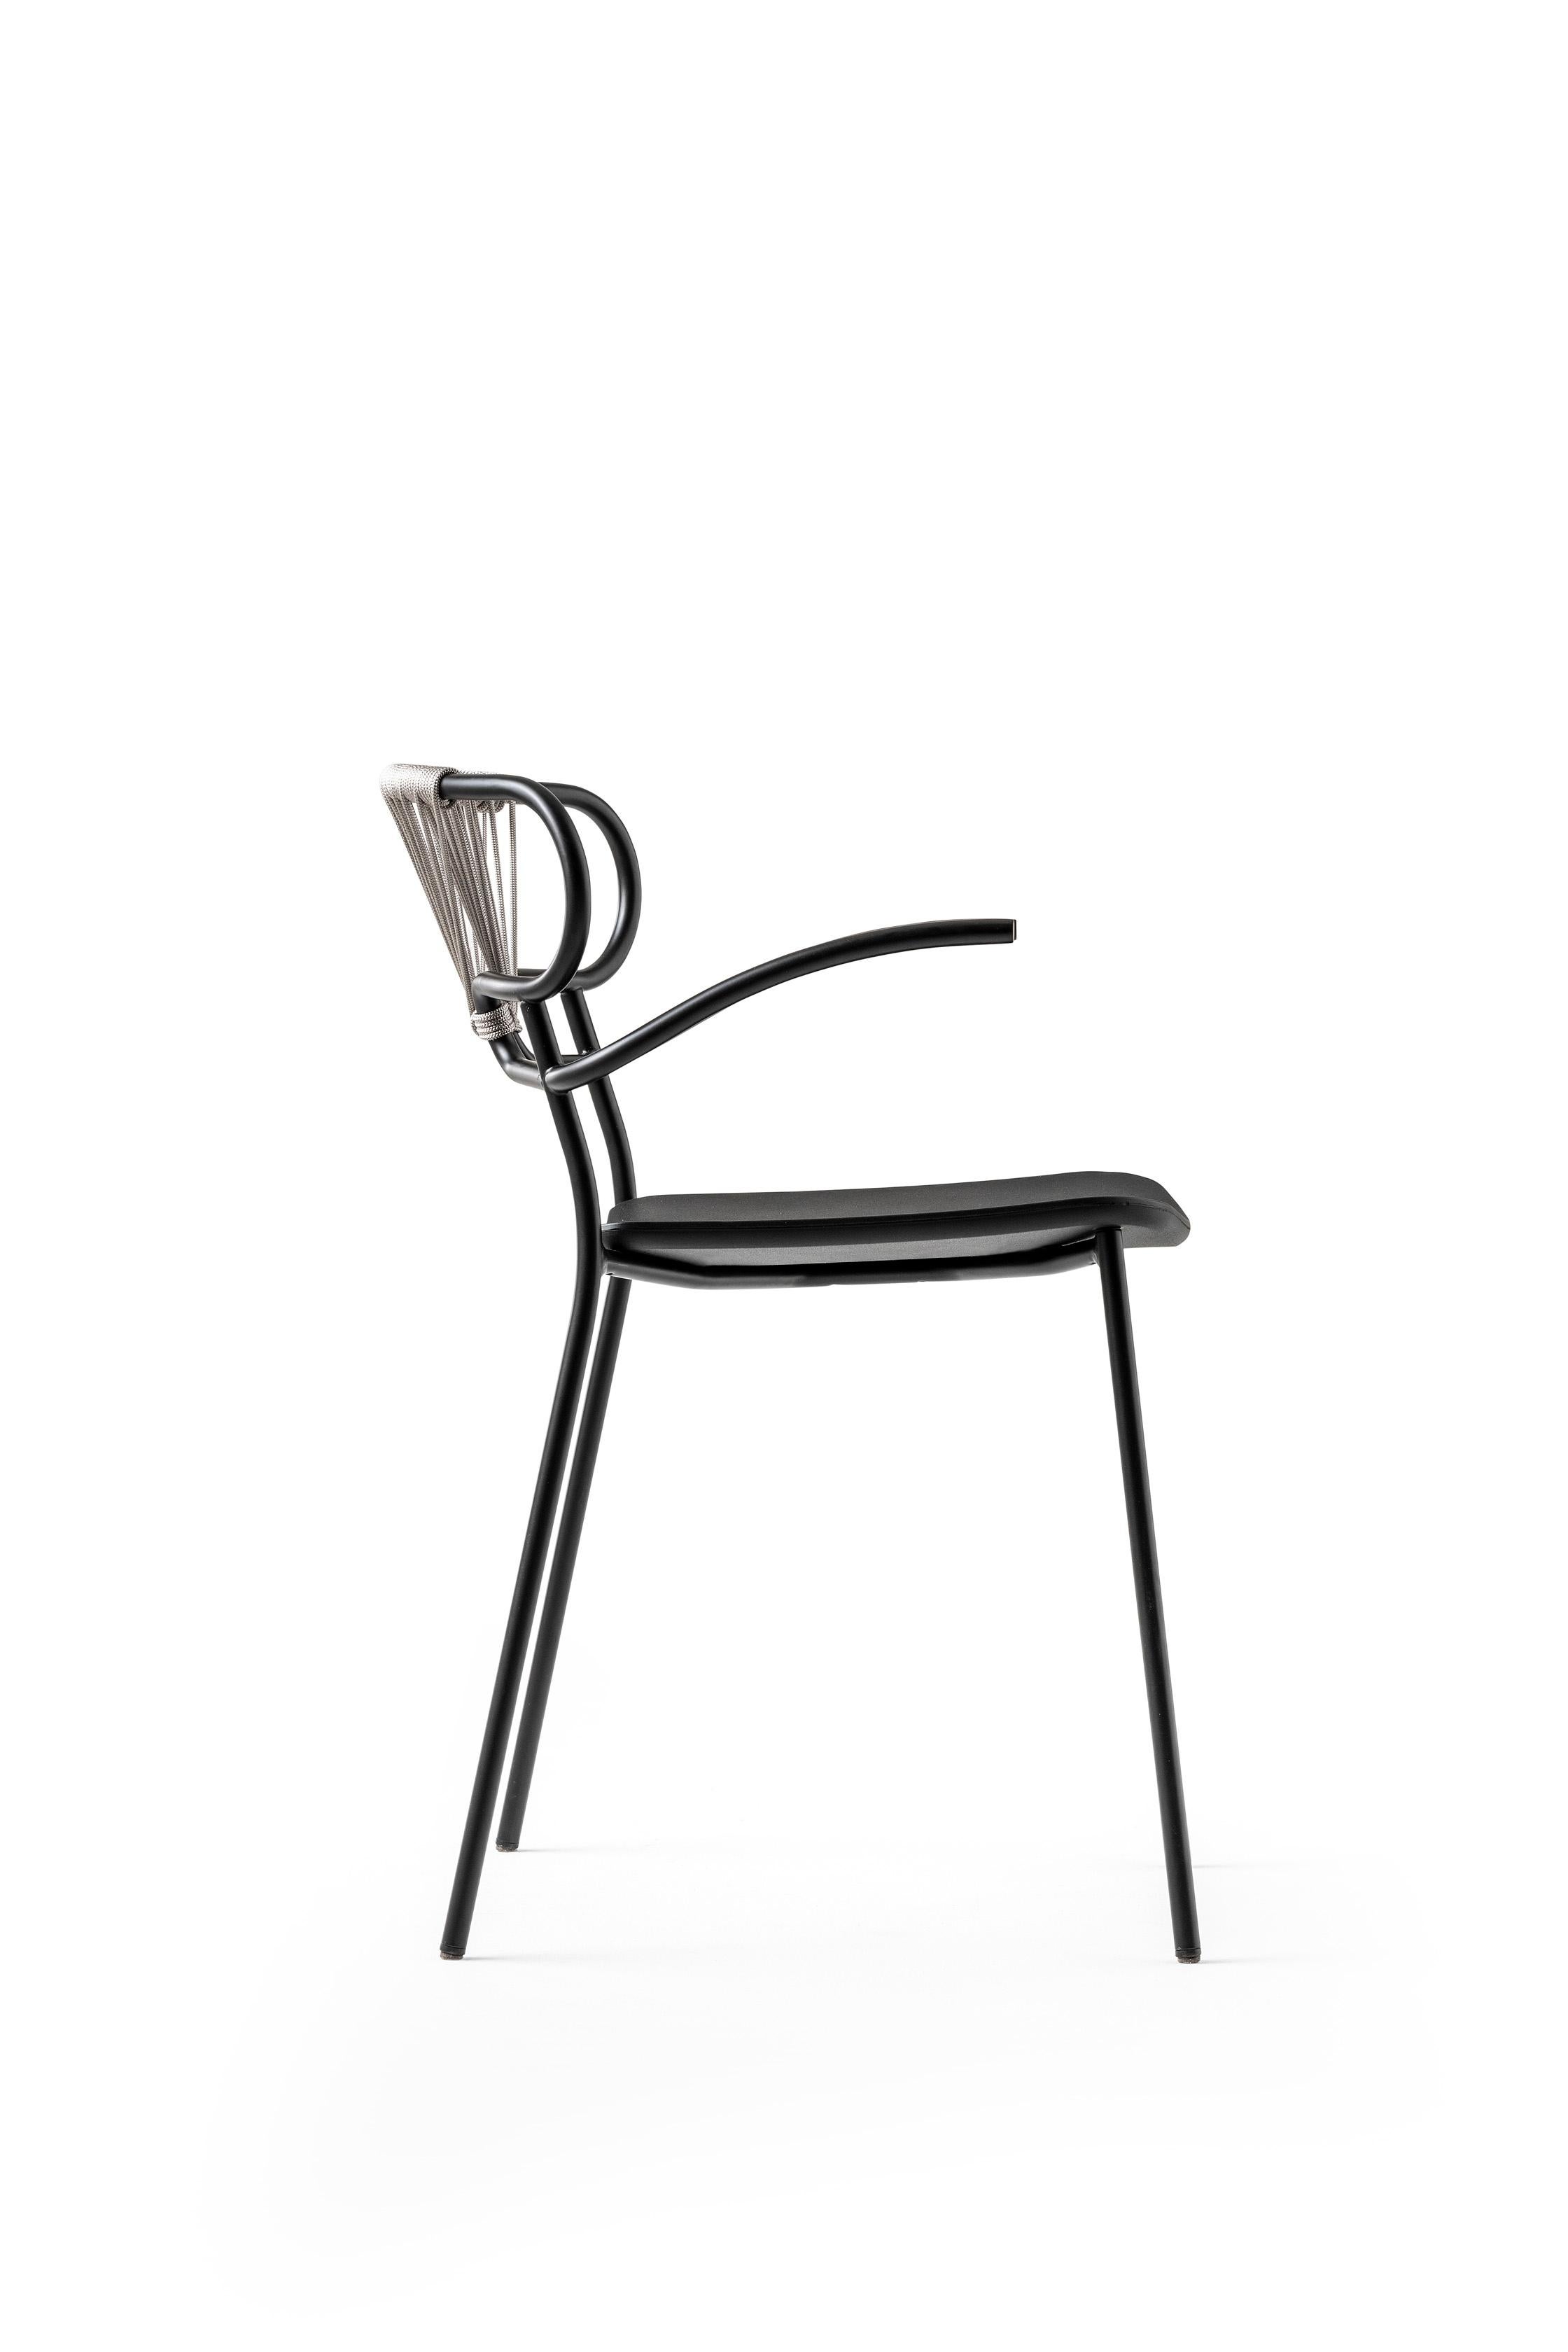 The Genoa chair collection, by talented young designer Cesare Ehr, featuring a stool and a chair with armrests, is also available in an outdoor version. The distinguishing element is the ‘one-line’ backrest, obtained by curving a single metal tube